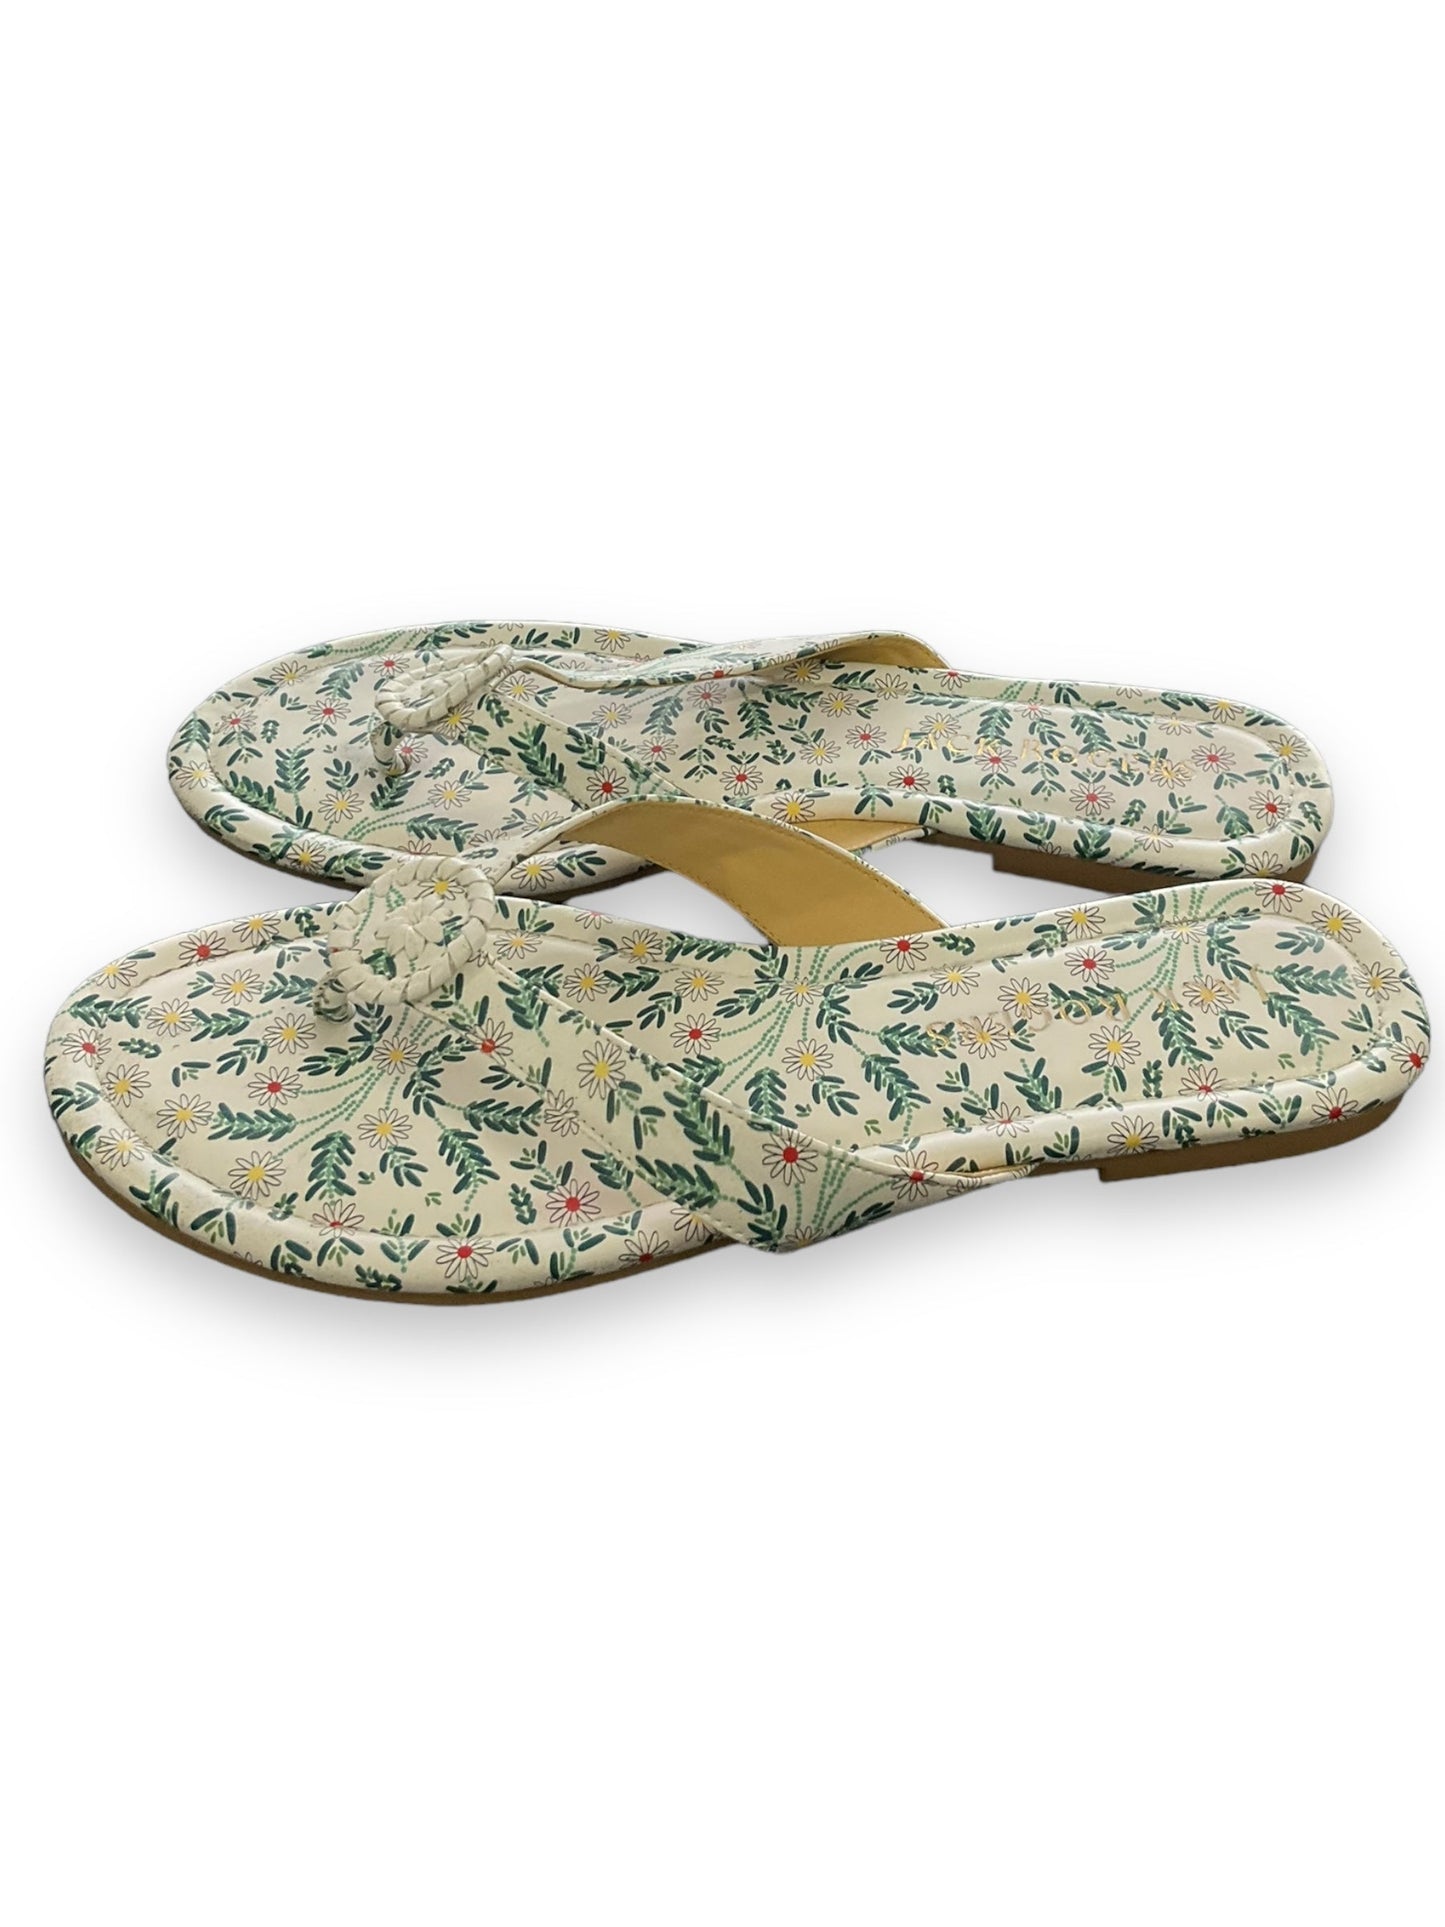 Sandals Flats By Jack Rogers  Size: 10